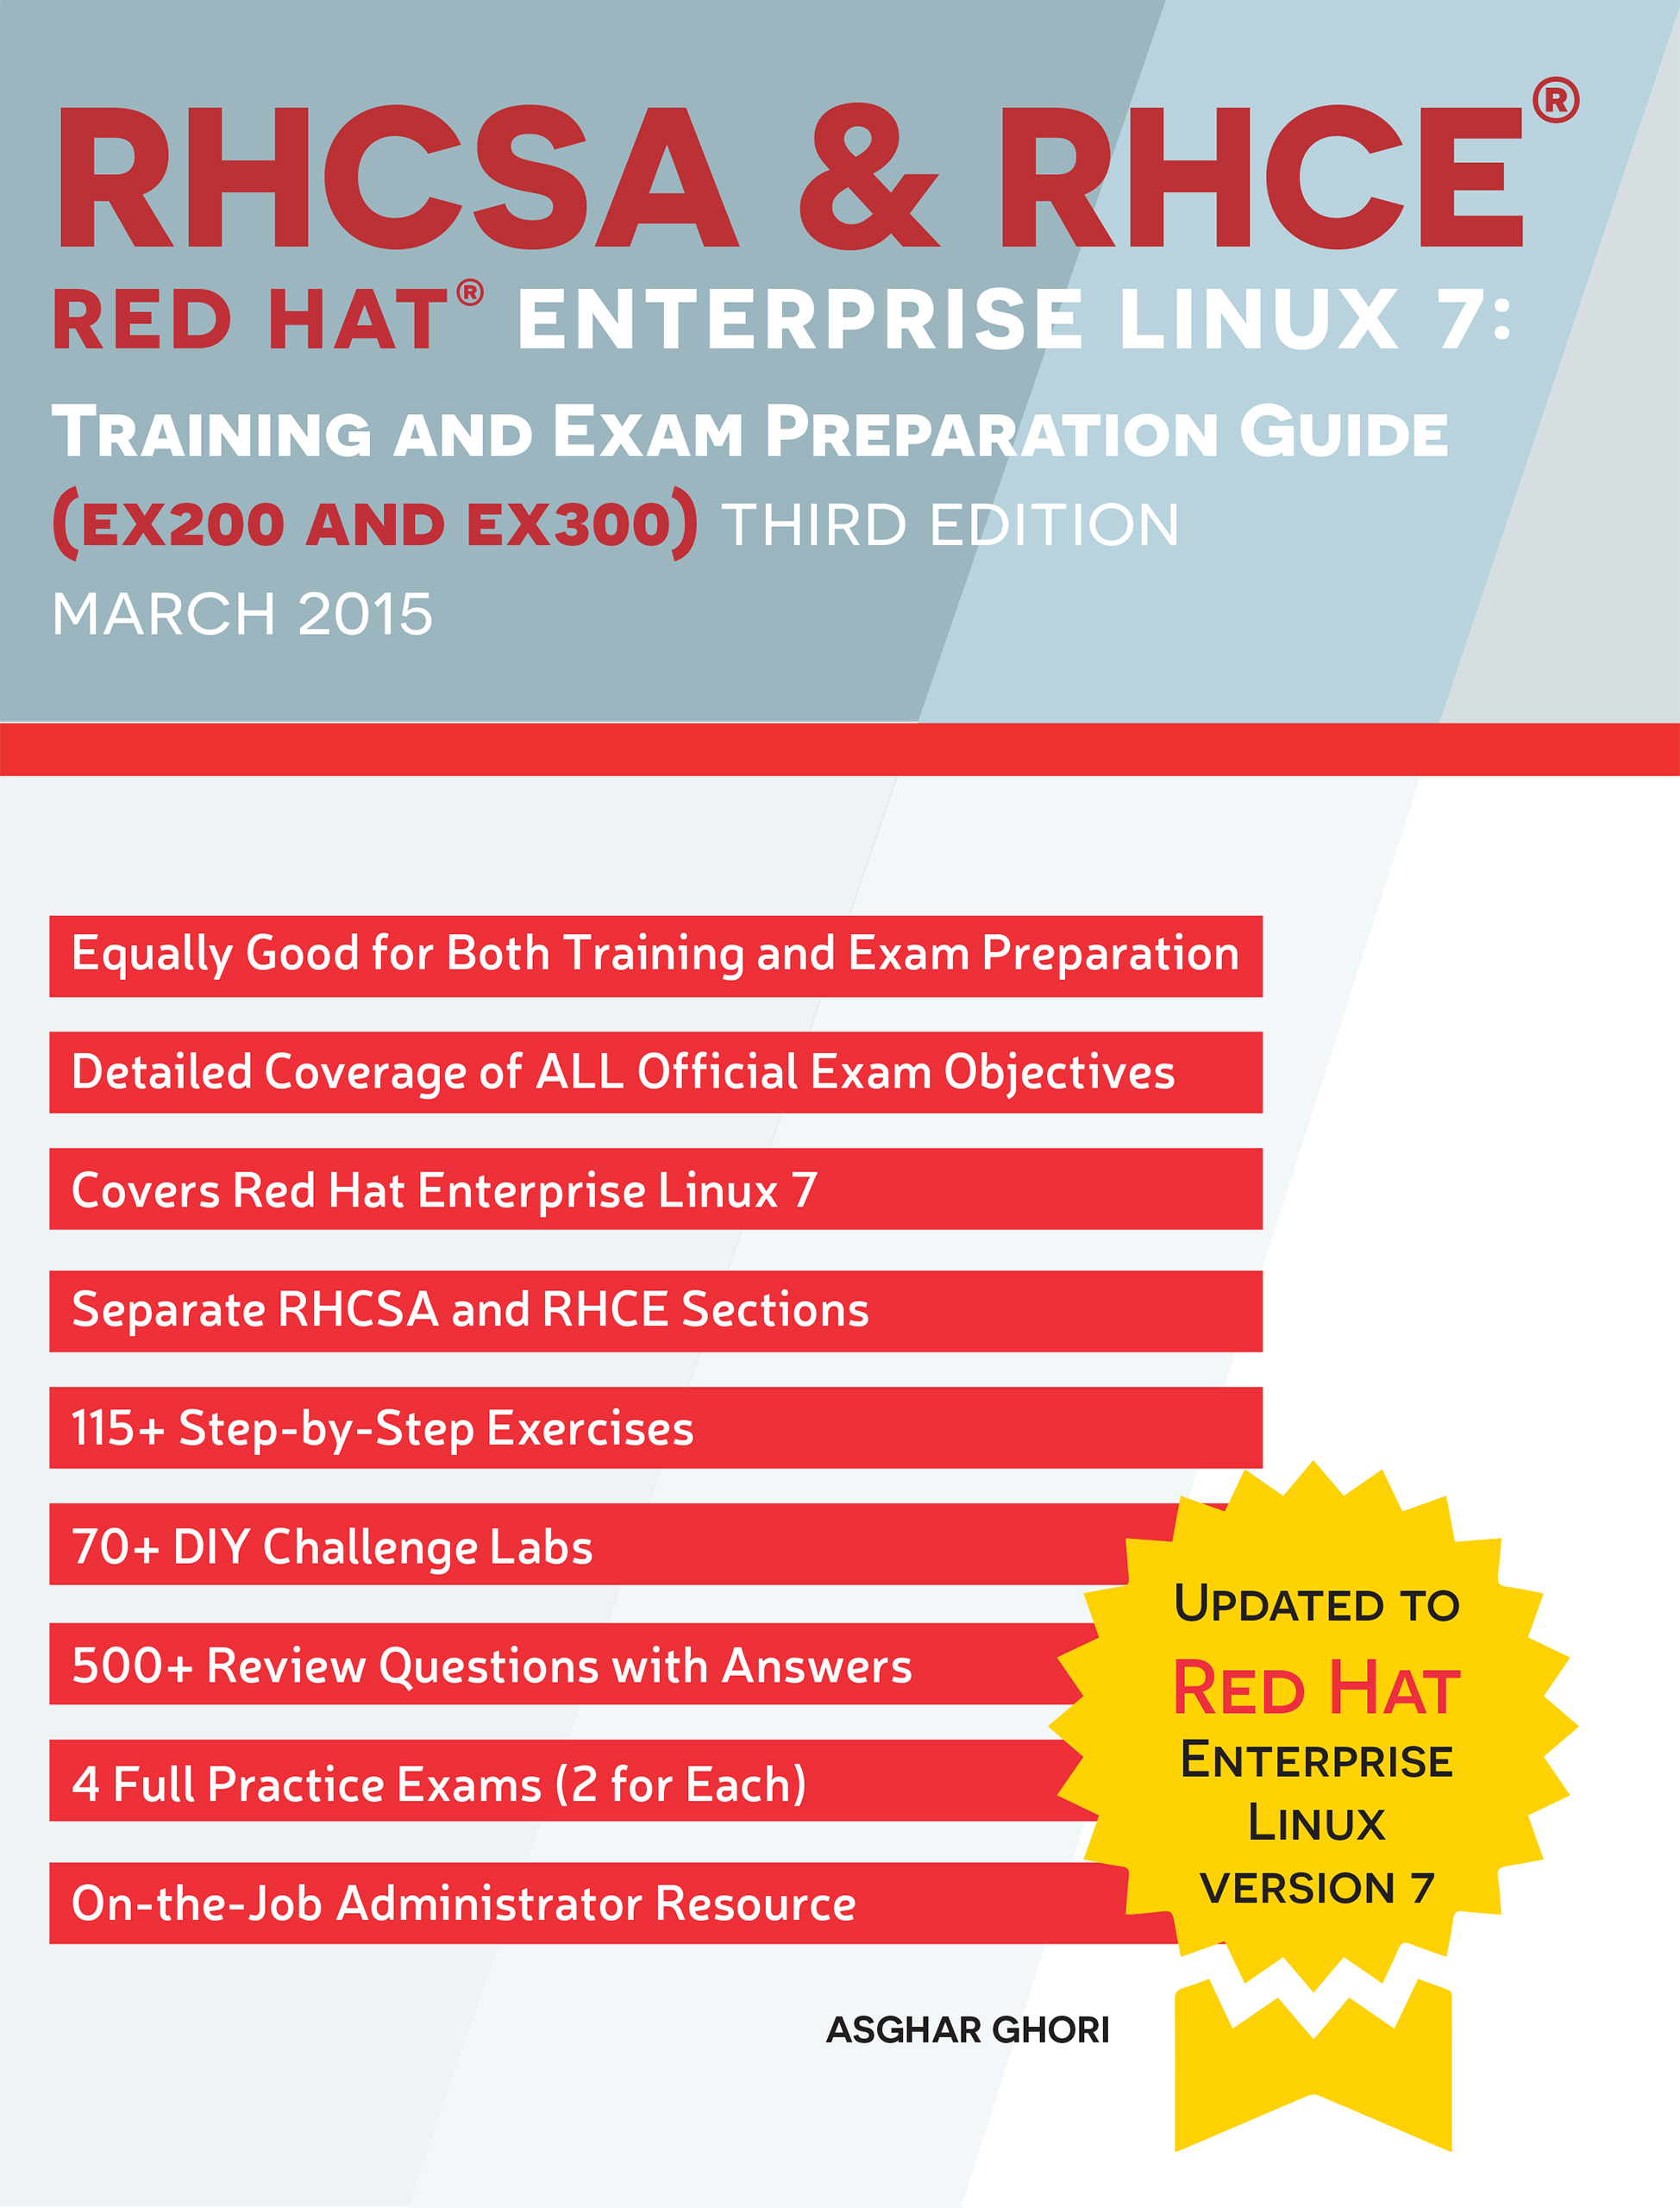 RHCSA & RHCE Red Hat Enterprise Linux 7: Training and Exam Preparation Guide (EX200 and EX300) - book author Asghar Ghori